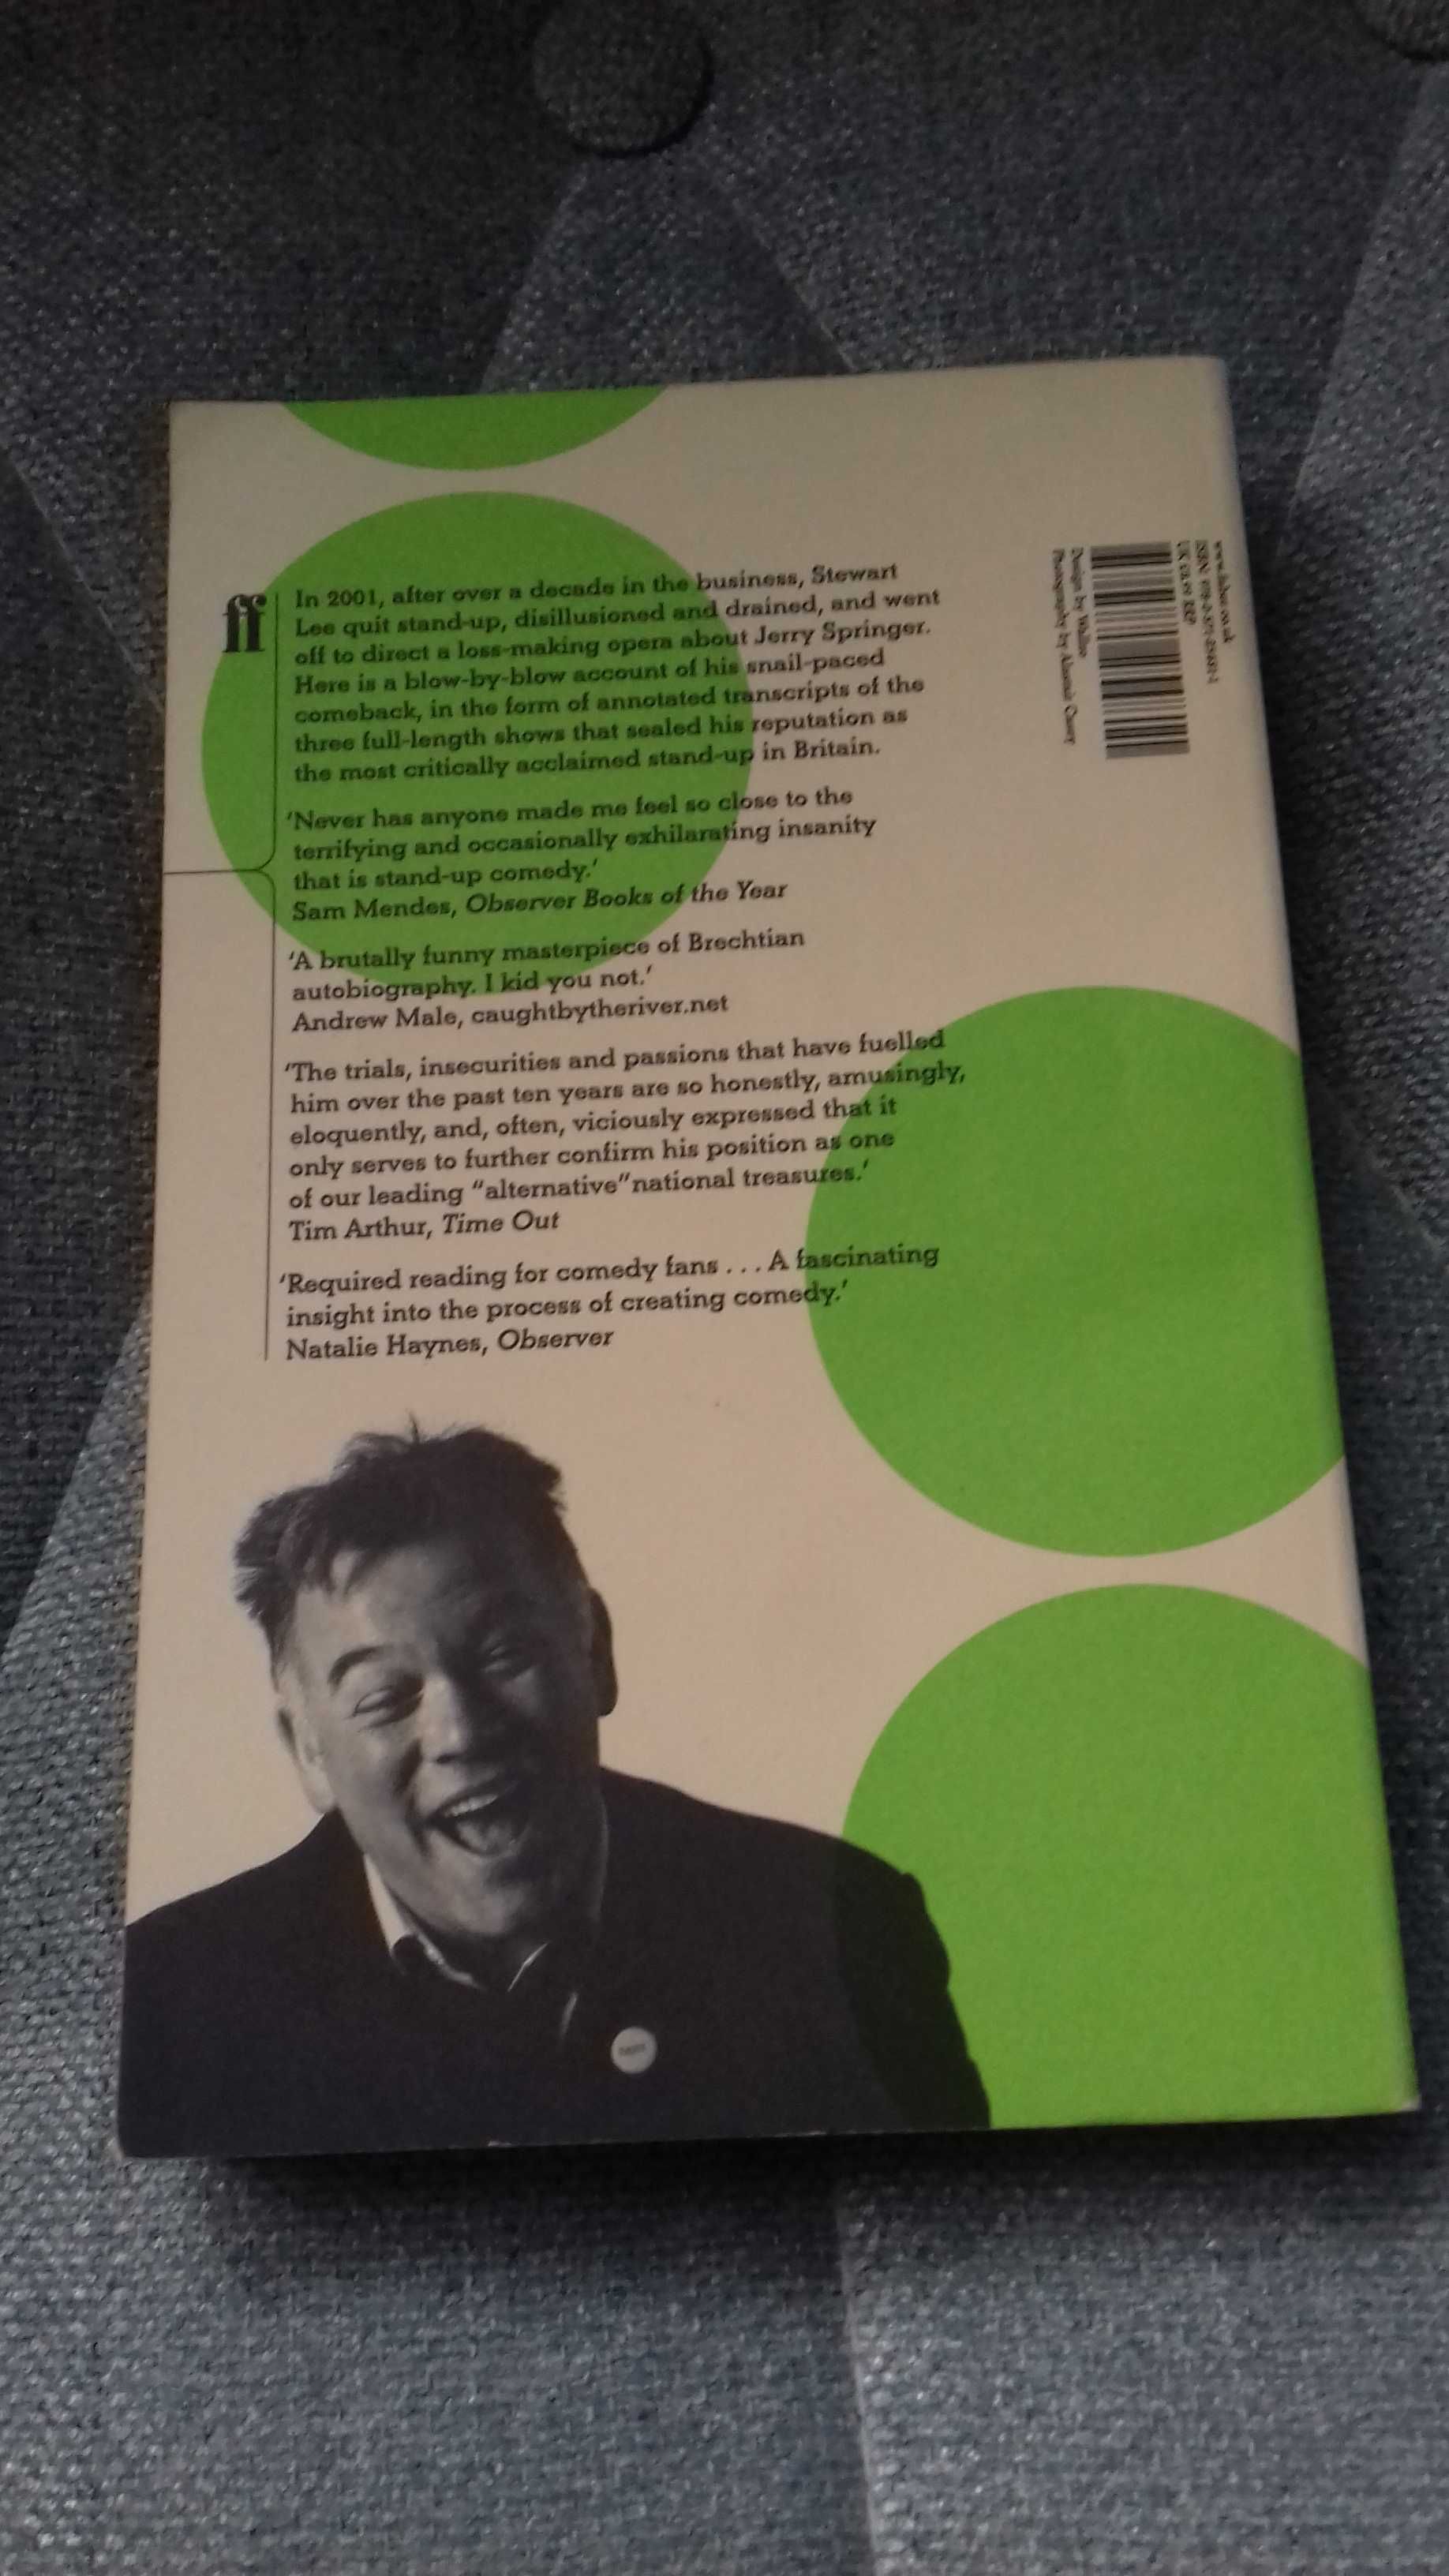 How I escaped my certain fate - Stewart Lee